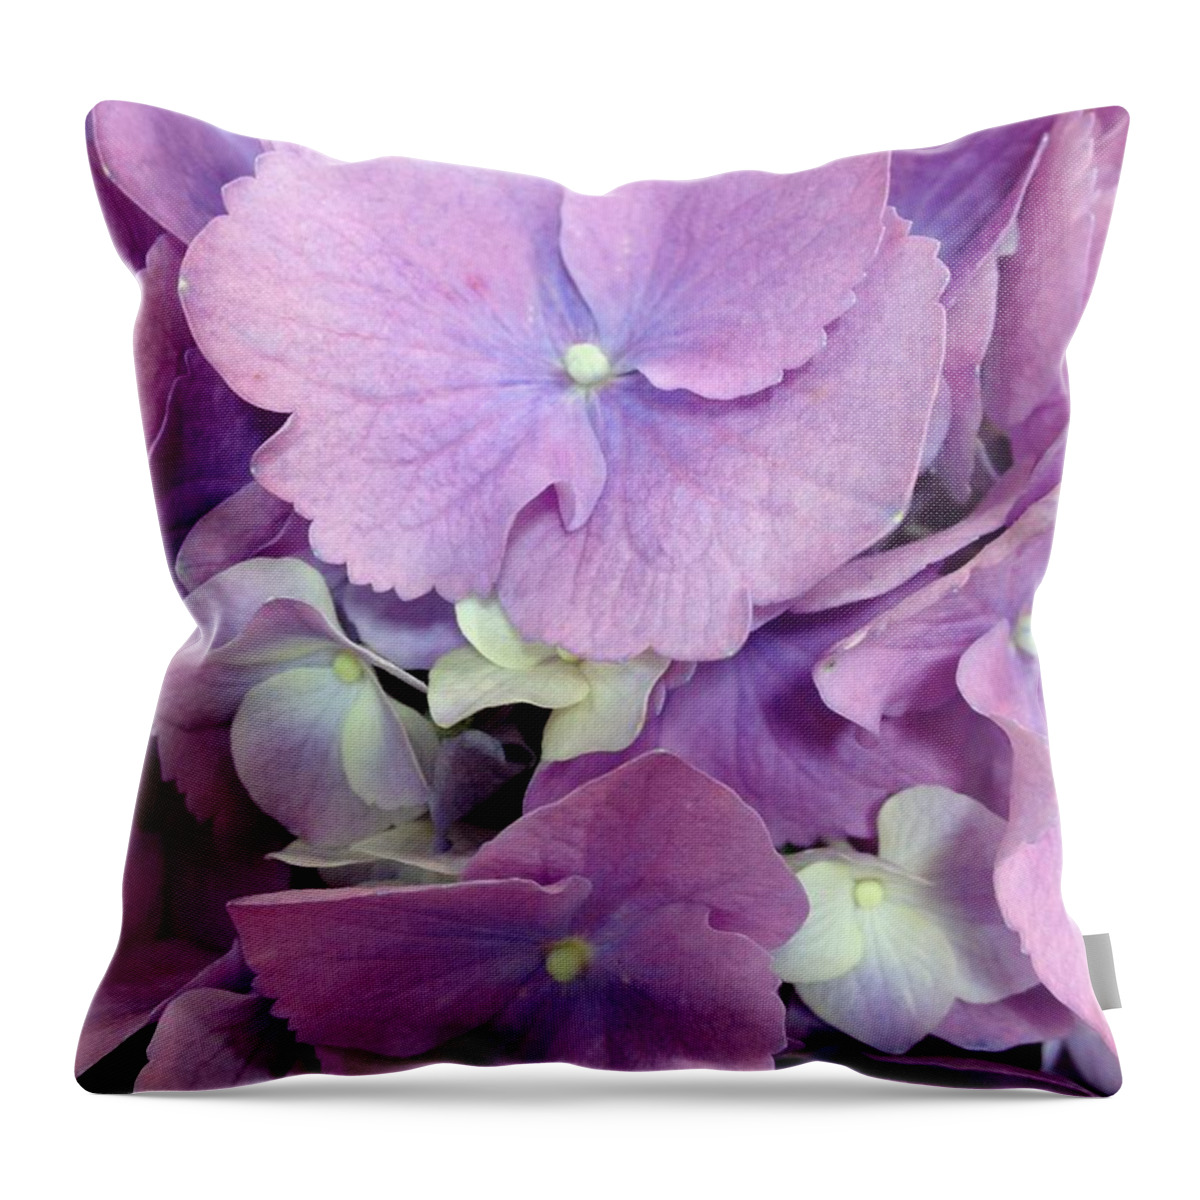 Purple Throw Pillow featuring the photograph Purple Petals by Marian Lonzetta